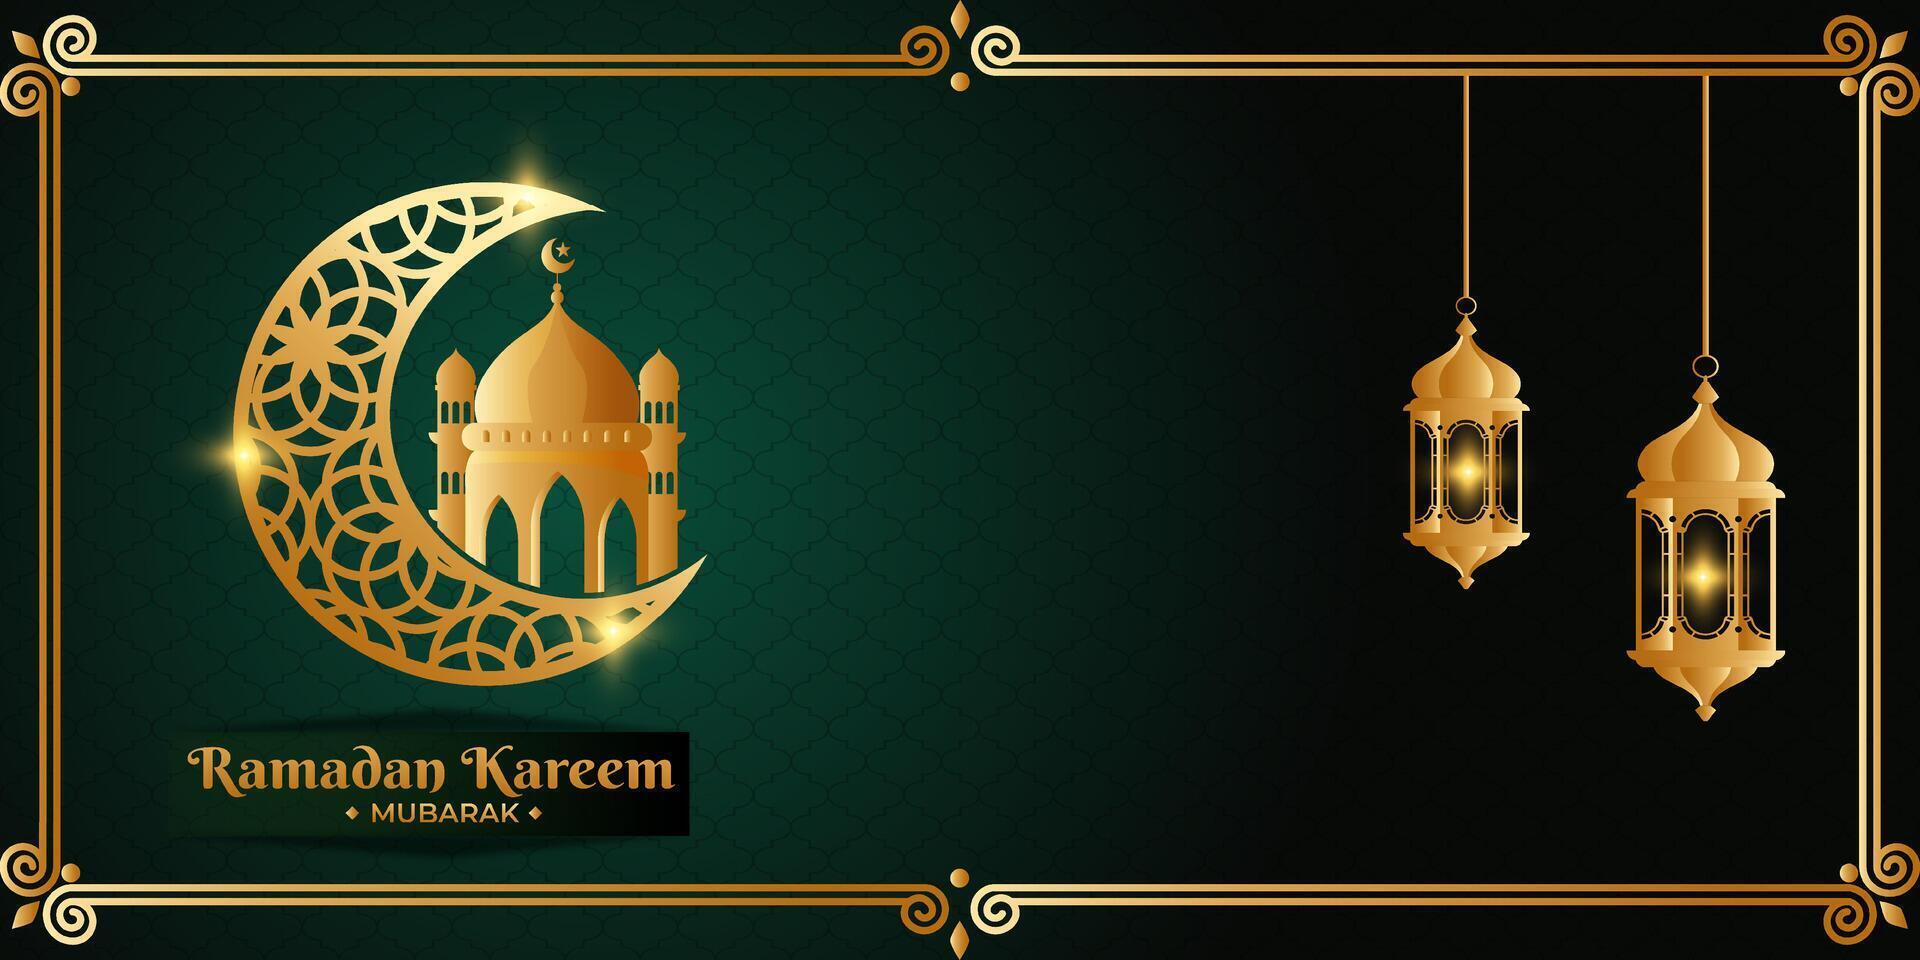 Ramadan Kareem moon mosque Arabic calligraphy, template for banner, invitation, poster, card for the celebration of Muslim community festival vector